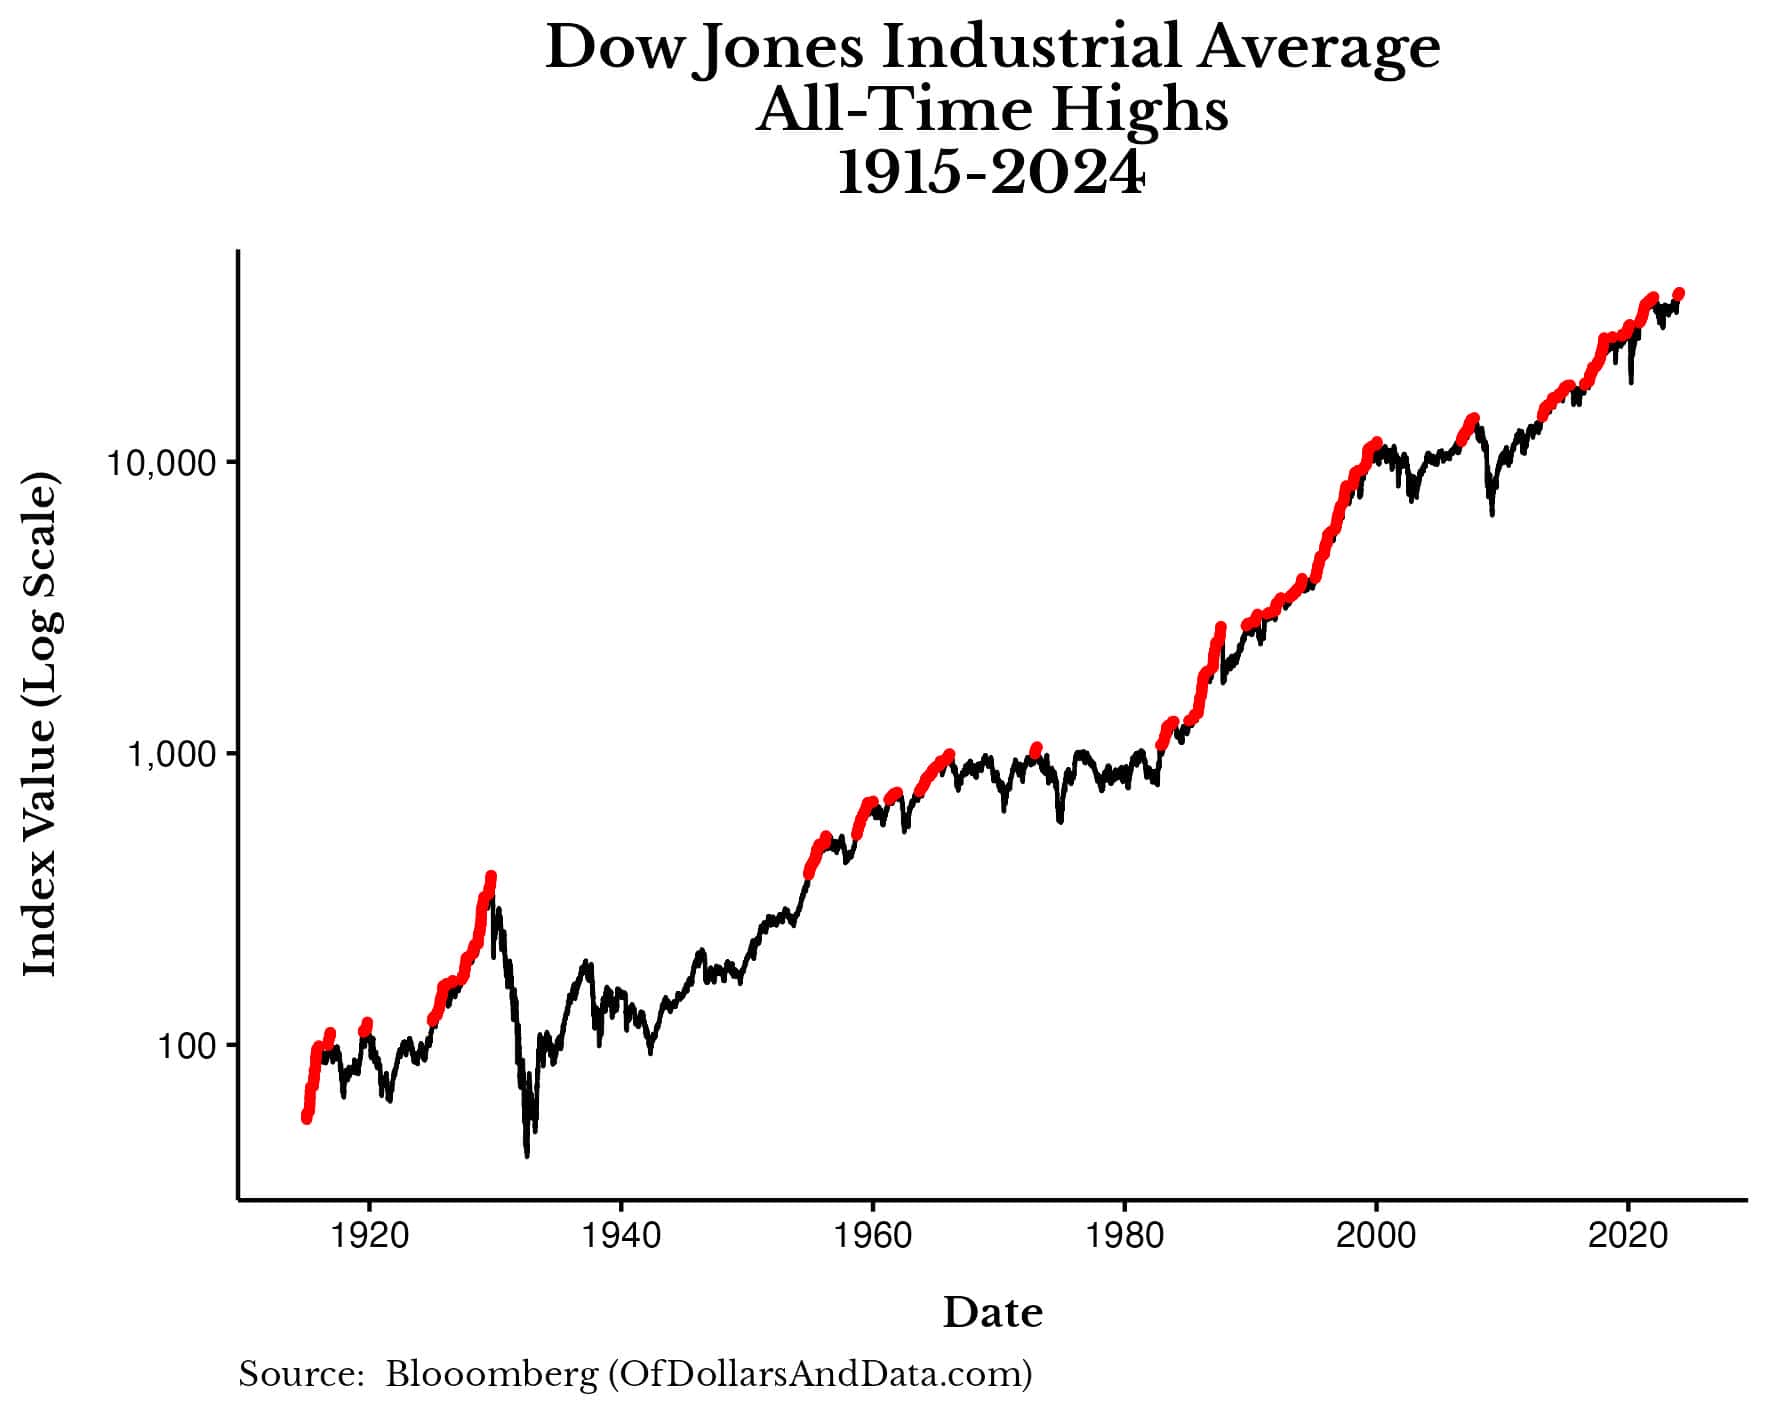 Dow Jones index and all-time highs from 1915-2024.